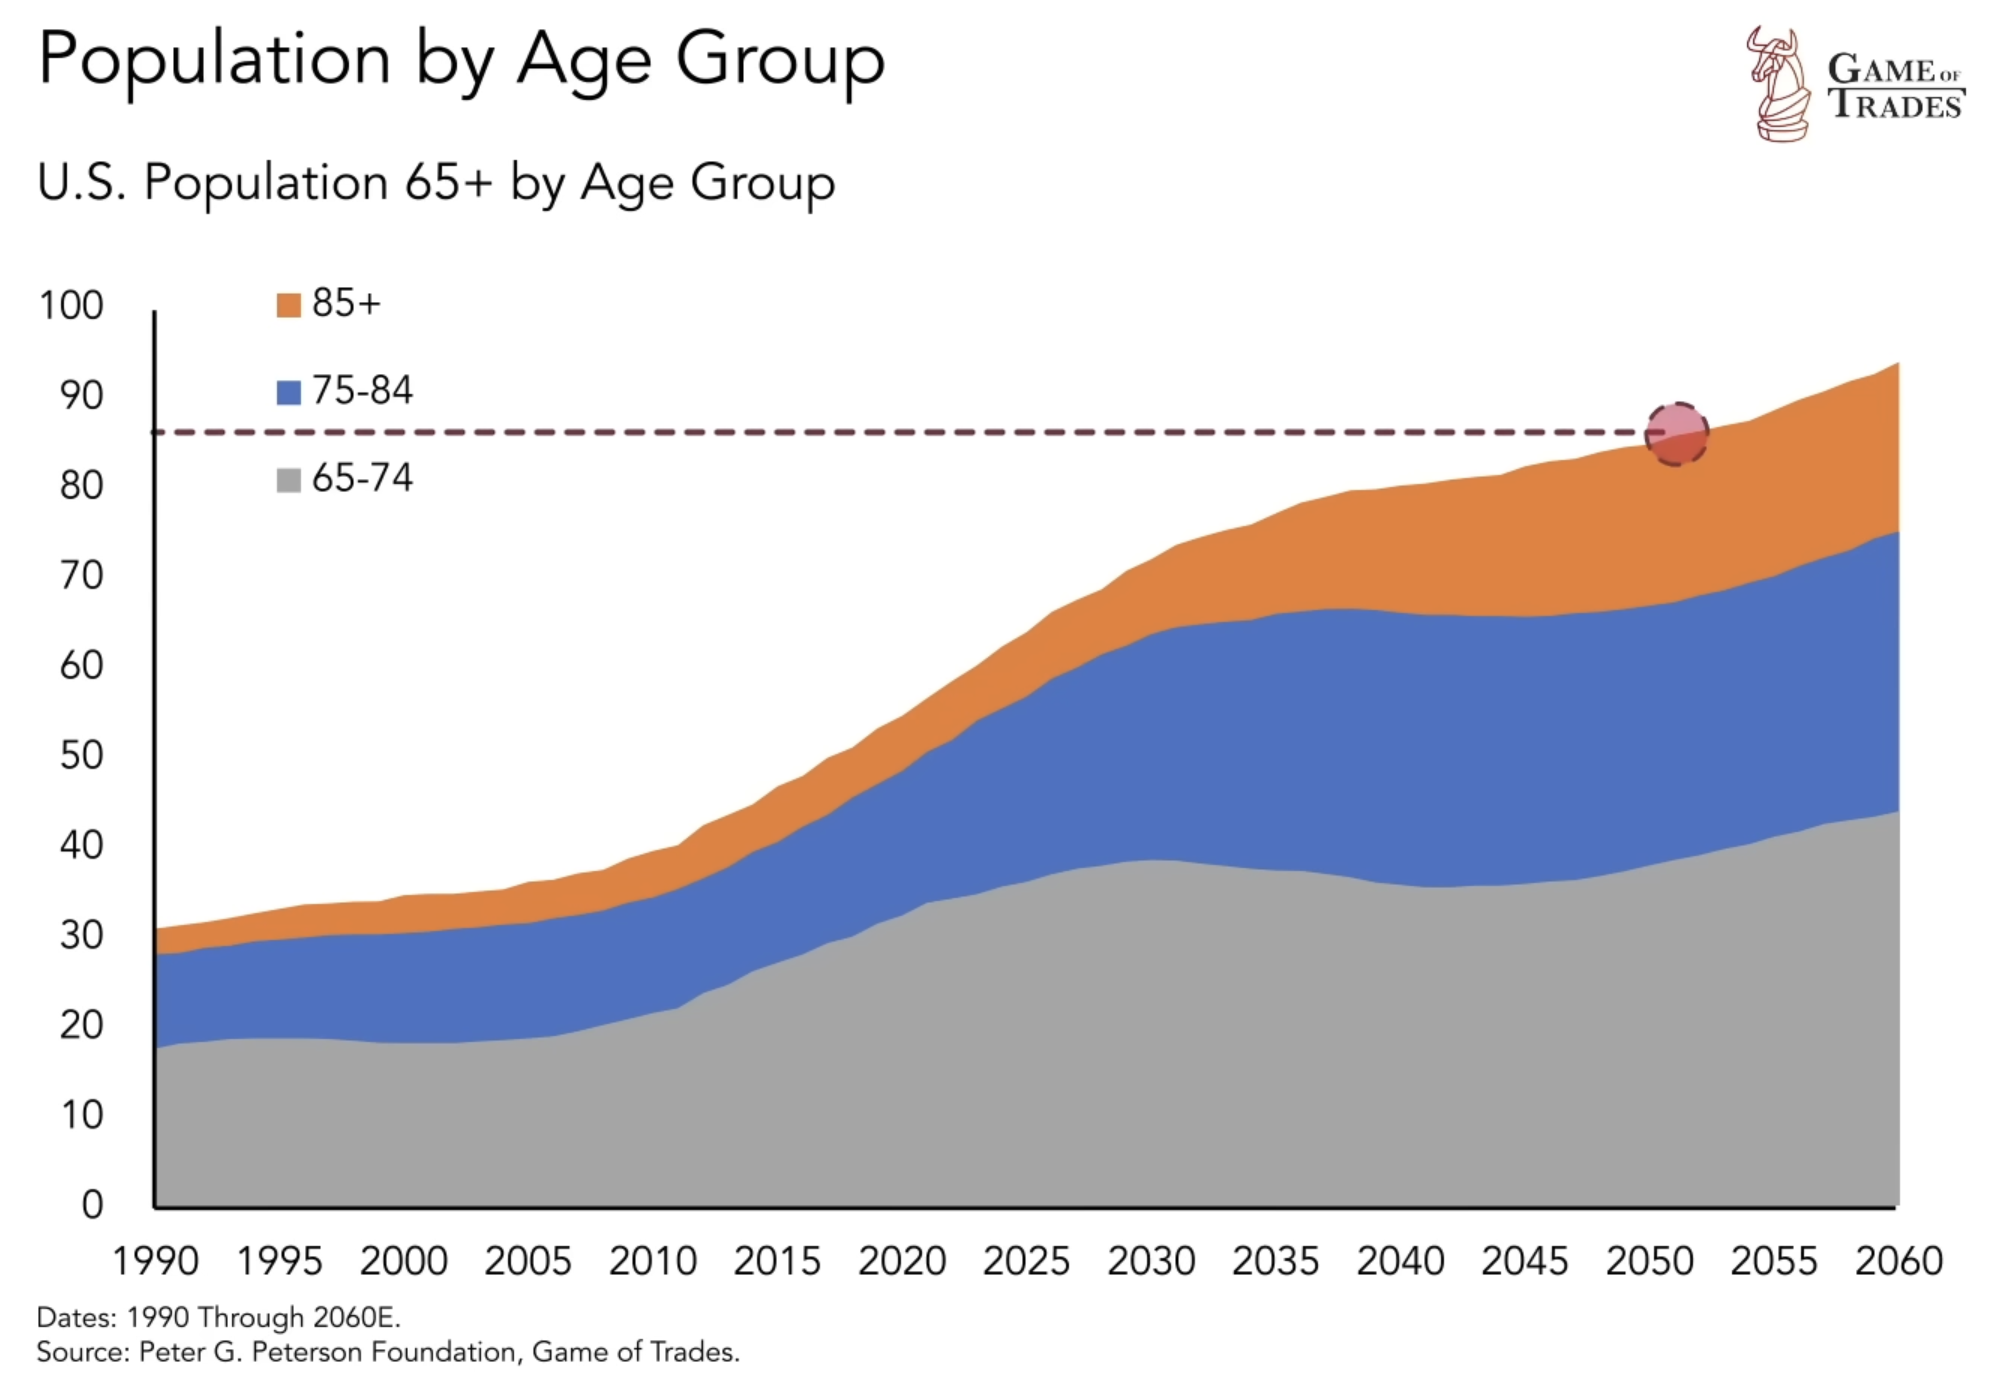 US Population 65+ by age group